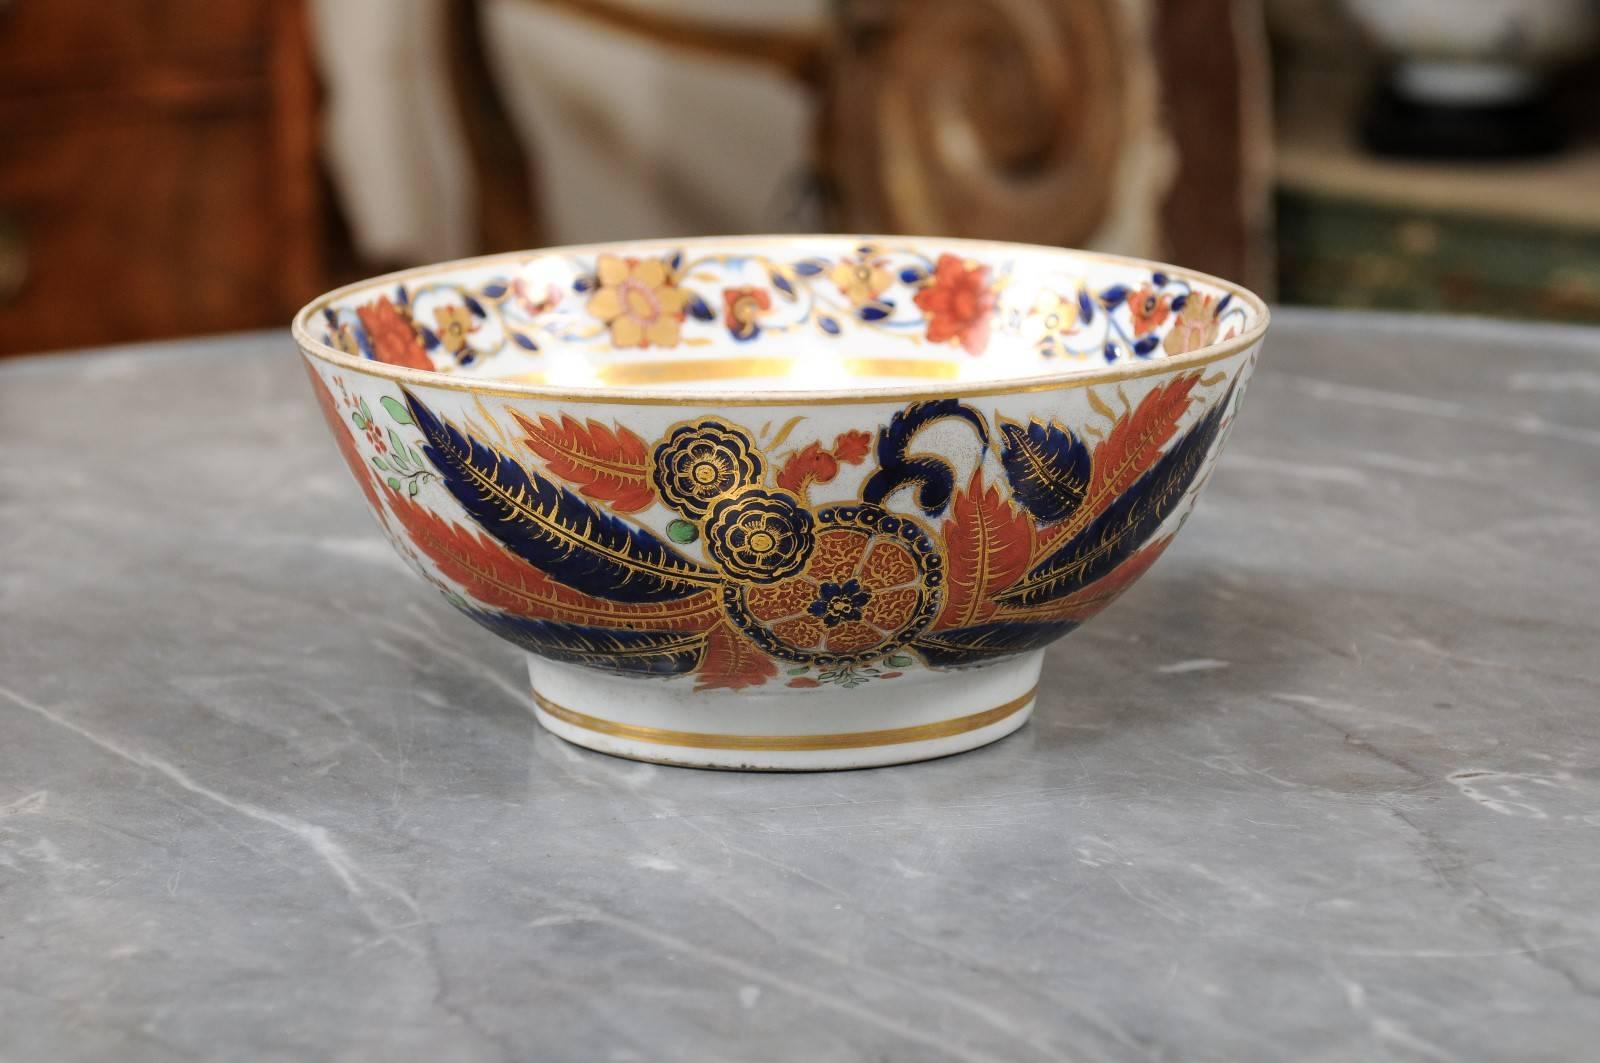 Spode “Tabacco Leaf” Punch bowl after Chinese Export design, England ca. 1820.